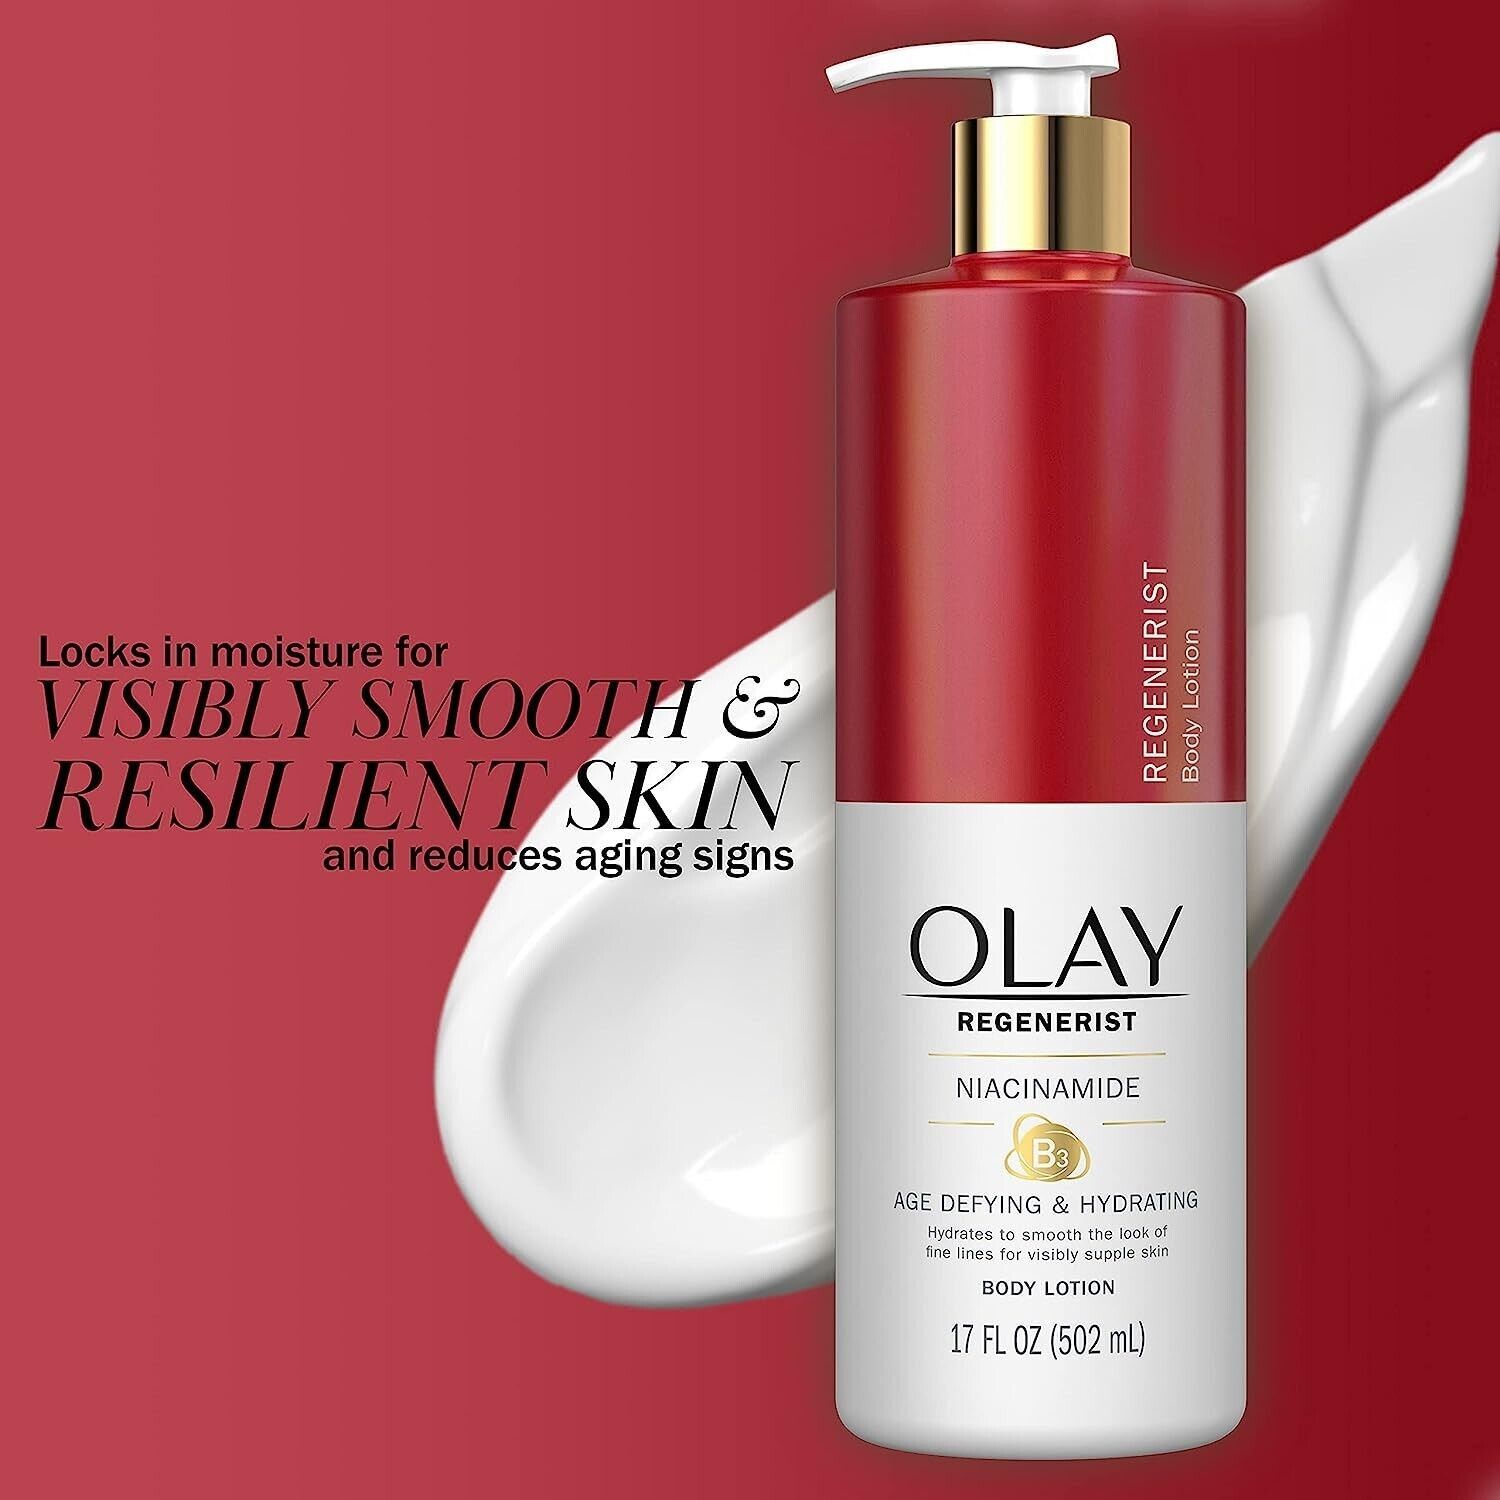 Olay Body Lotion: 1 customer review and 17 listings